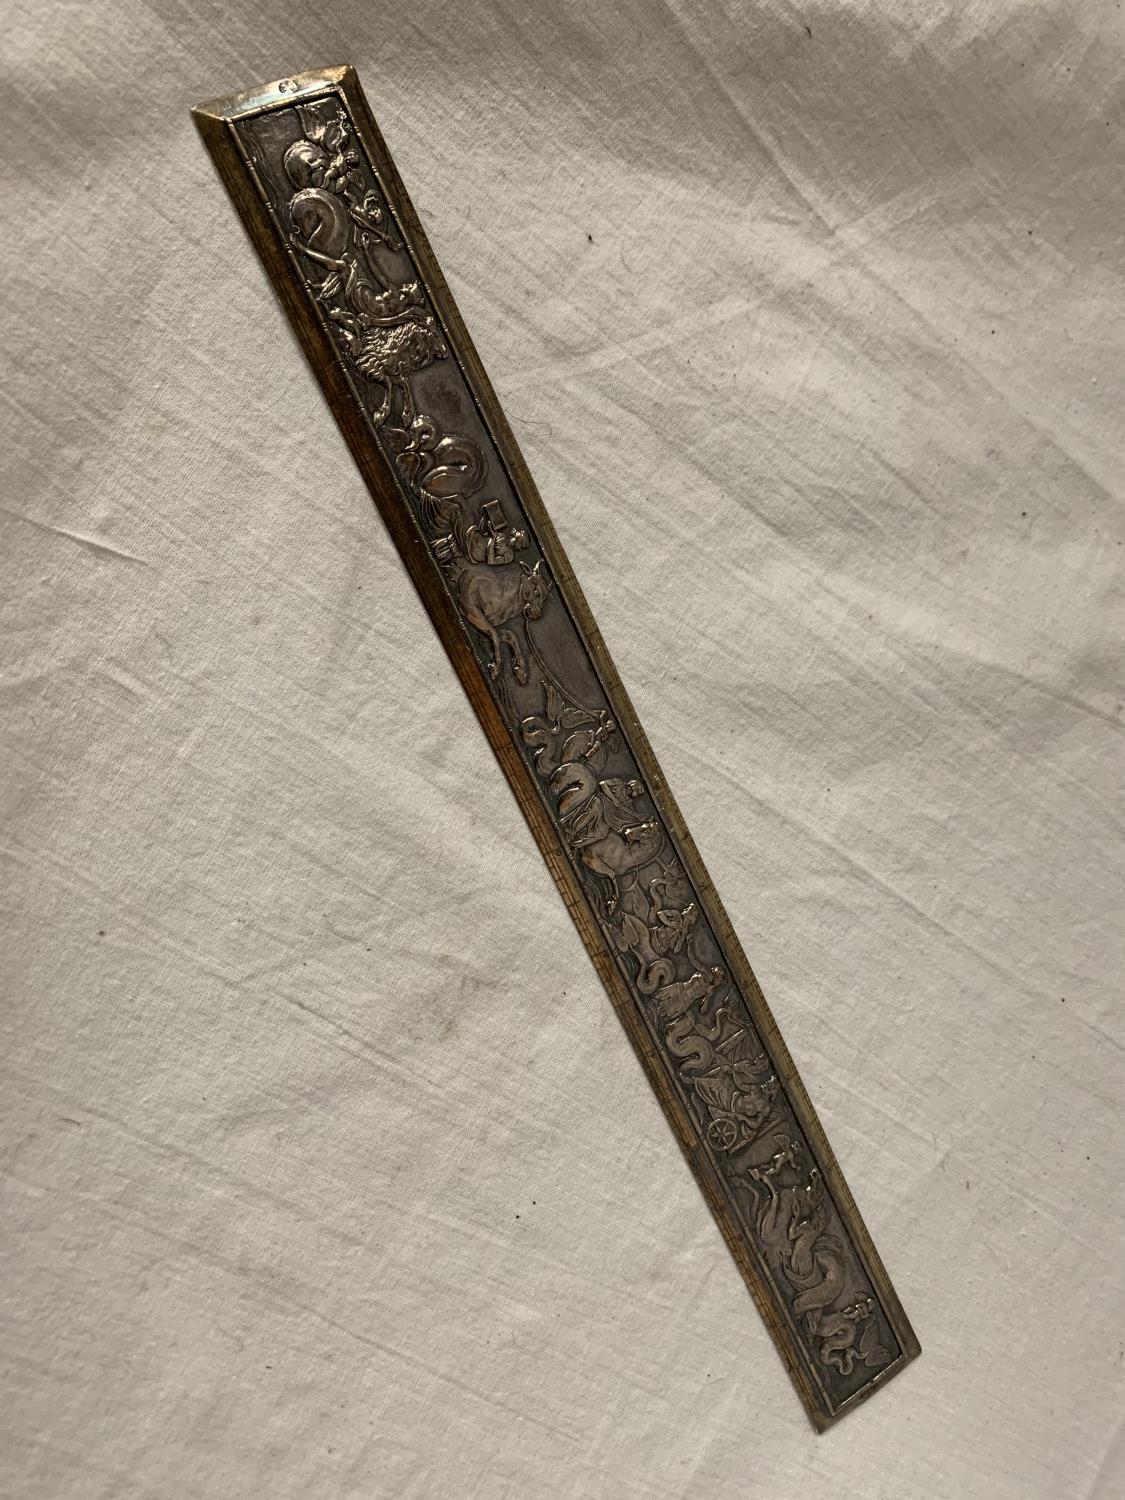 A DECORATIVE ELECTROPLATED TWELVE INCH RULER